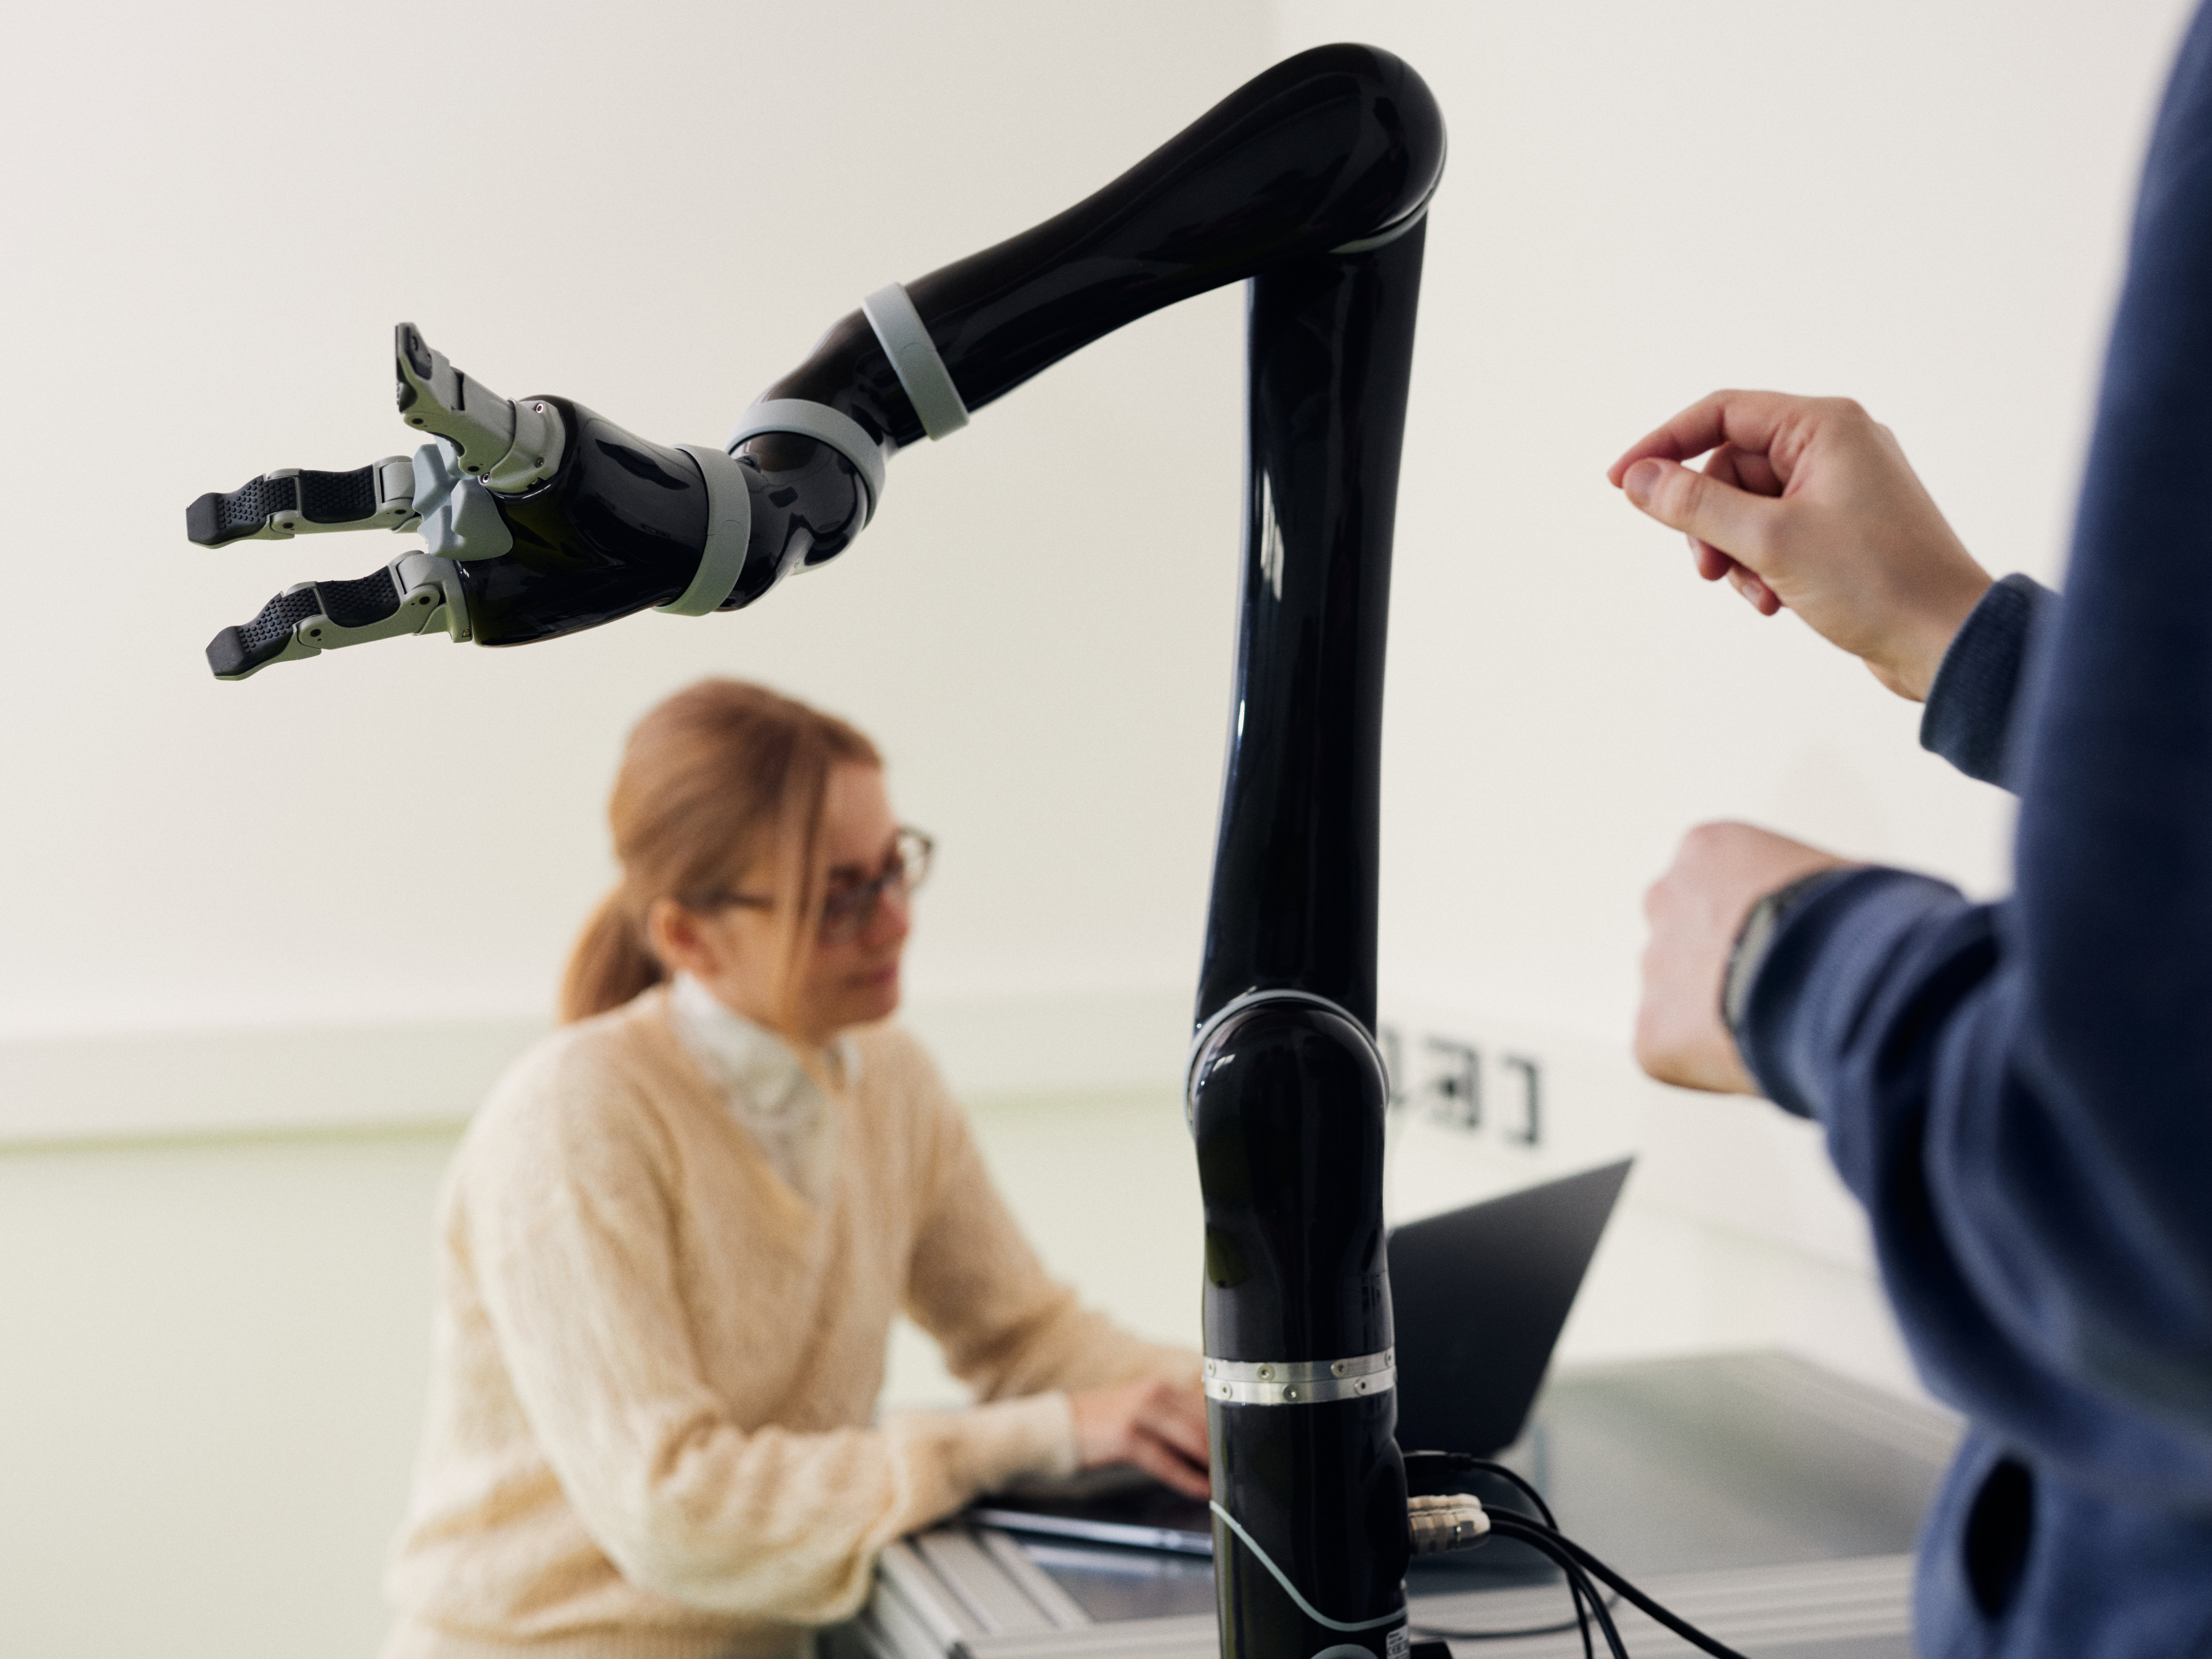 Two researchers work with a robot arm